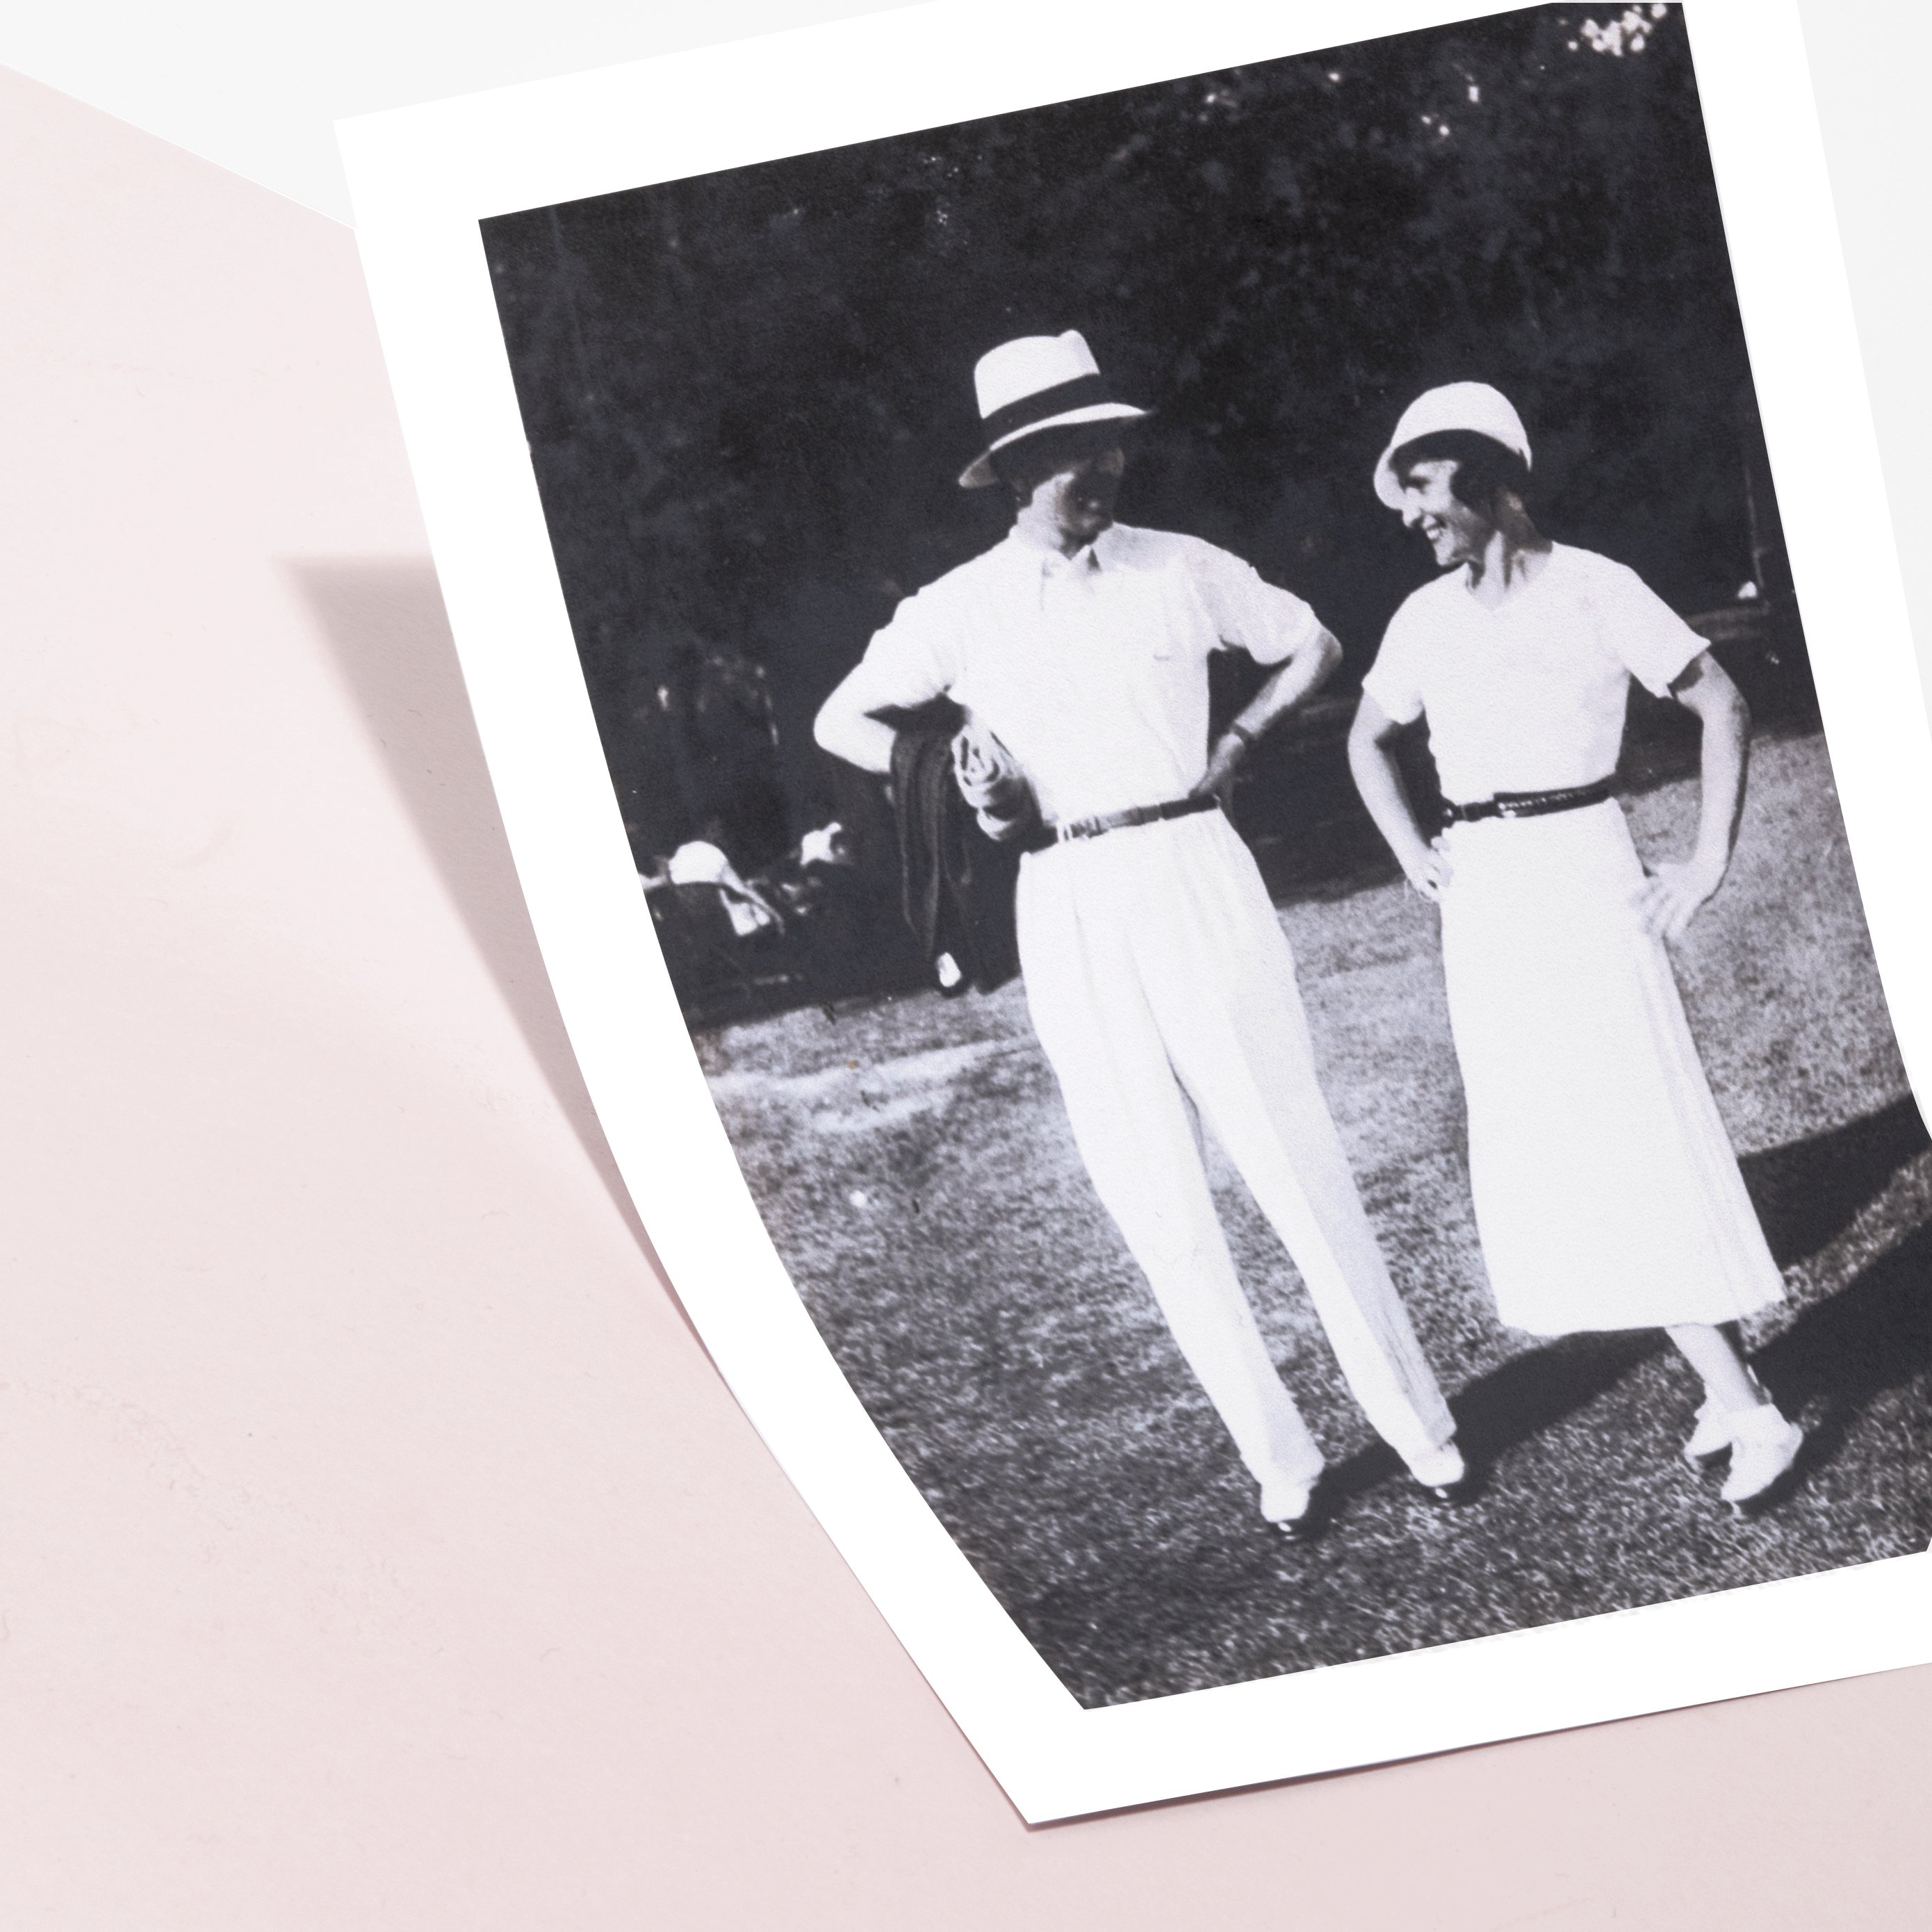 Lacoste on Twitter: Lacoste founder/tennis player, René Lacoste, with wife, Thion de la Chaume, iconic golfer. #1936 ©LacosteArchives https://t.co/EoLBkblETB" / Twitter